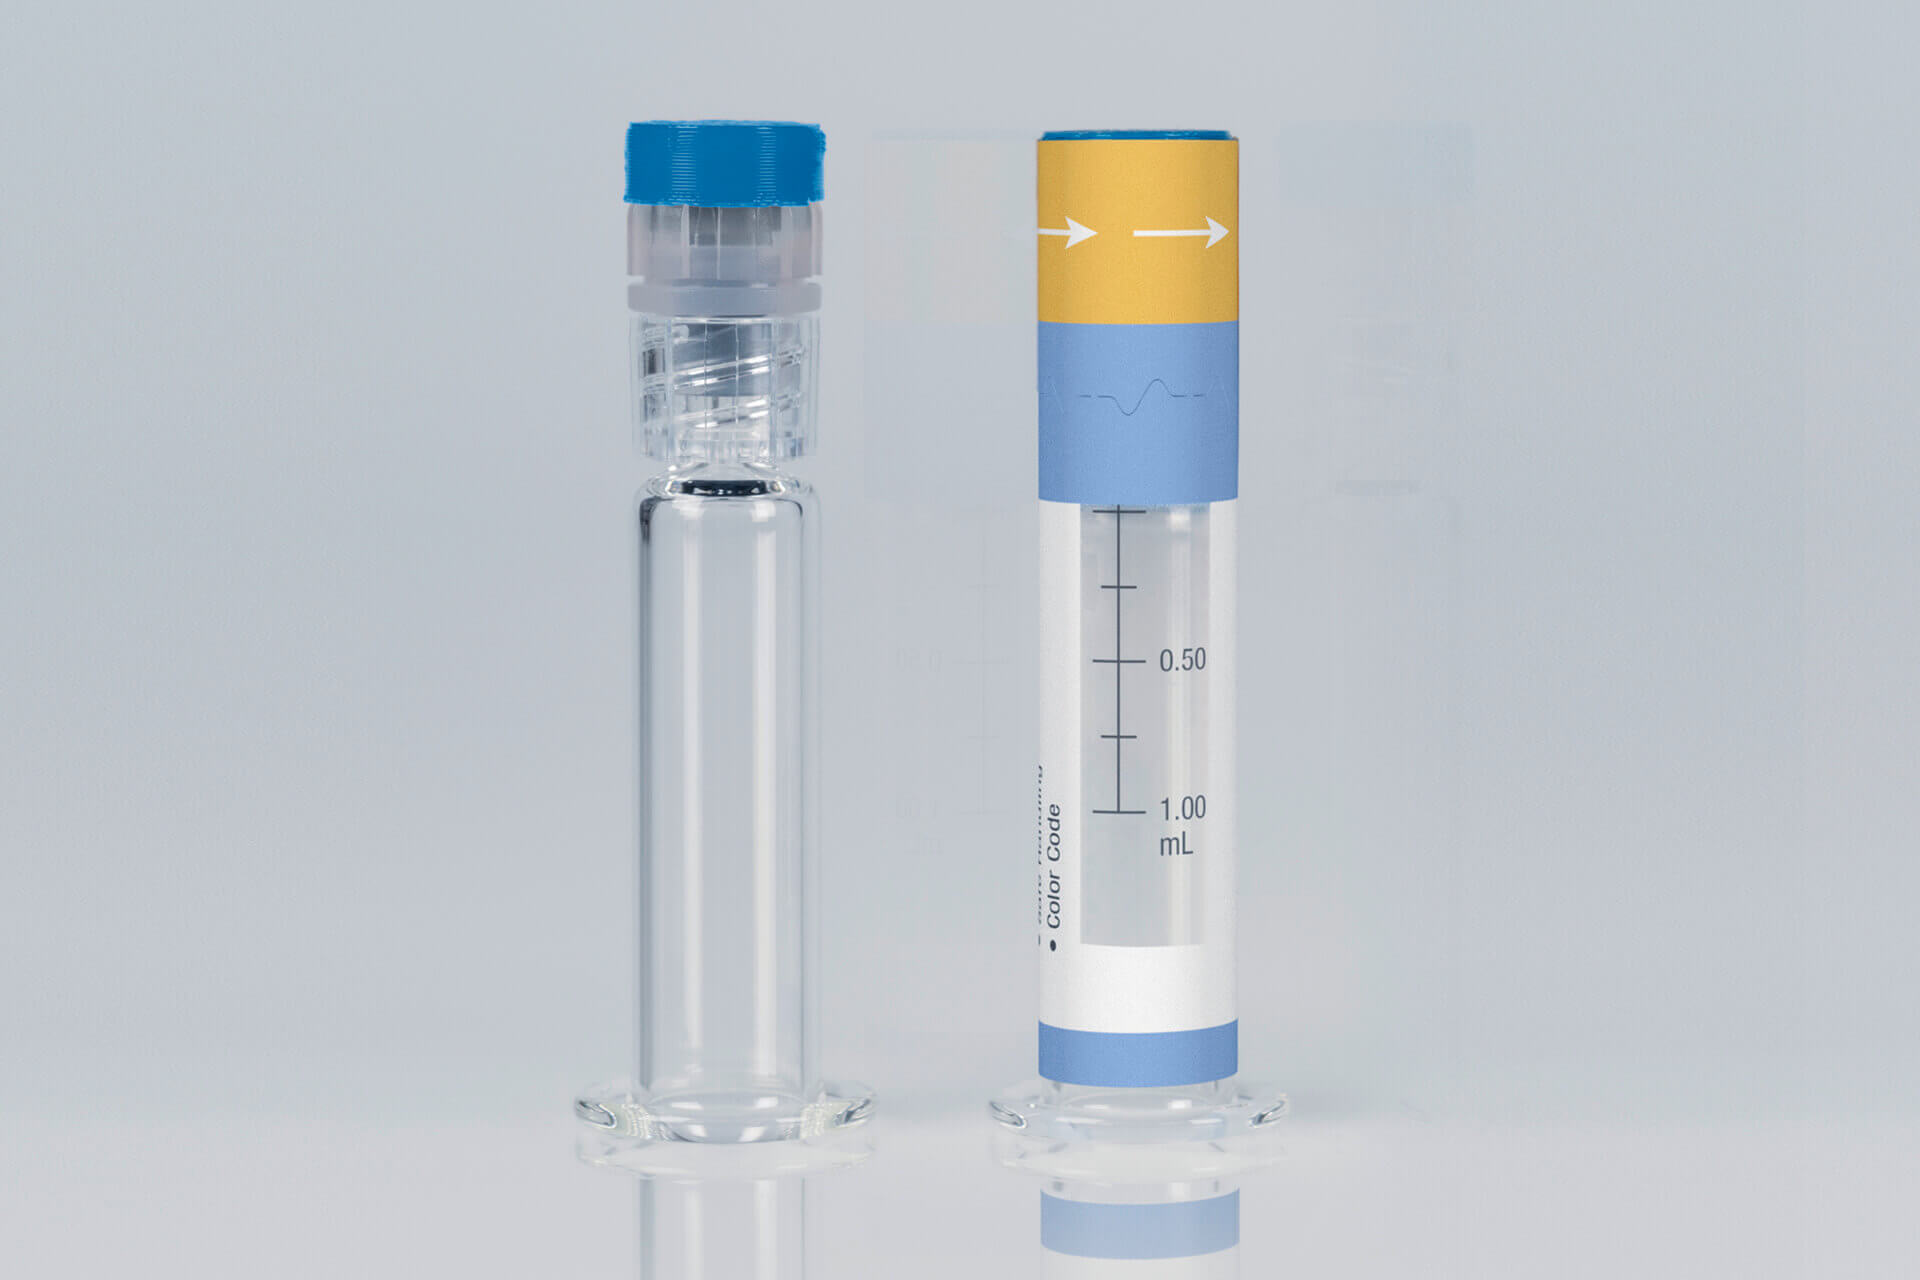 A small cap adapter is applied to the upper part of the syringe cap and complemented by a functional label.